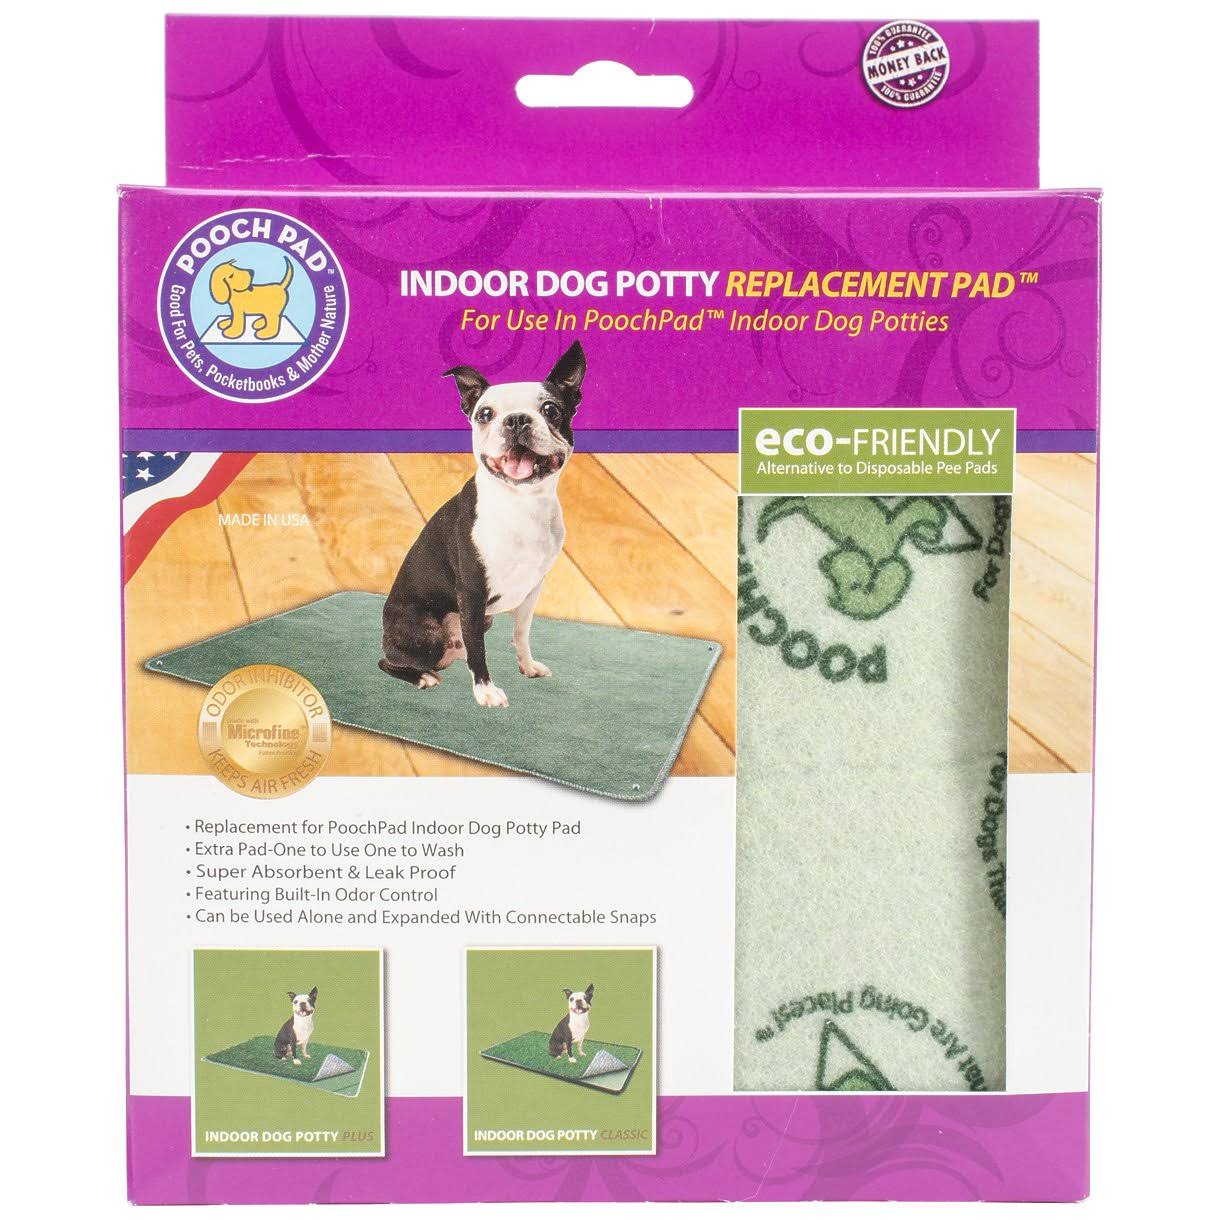 PoochPad Indoor Turf Dog Potty Replacement Pad - 16" x 24"